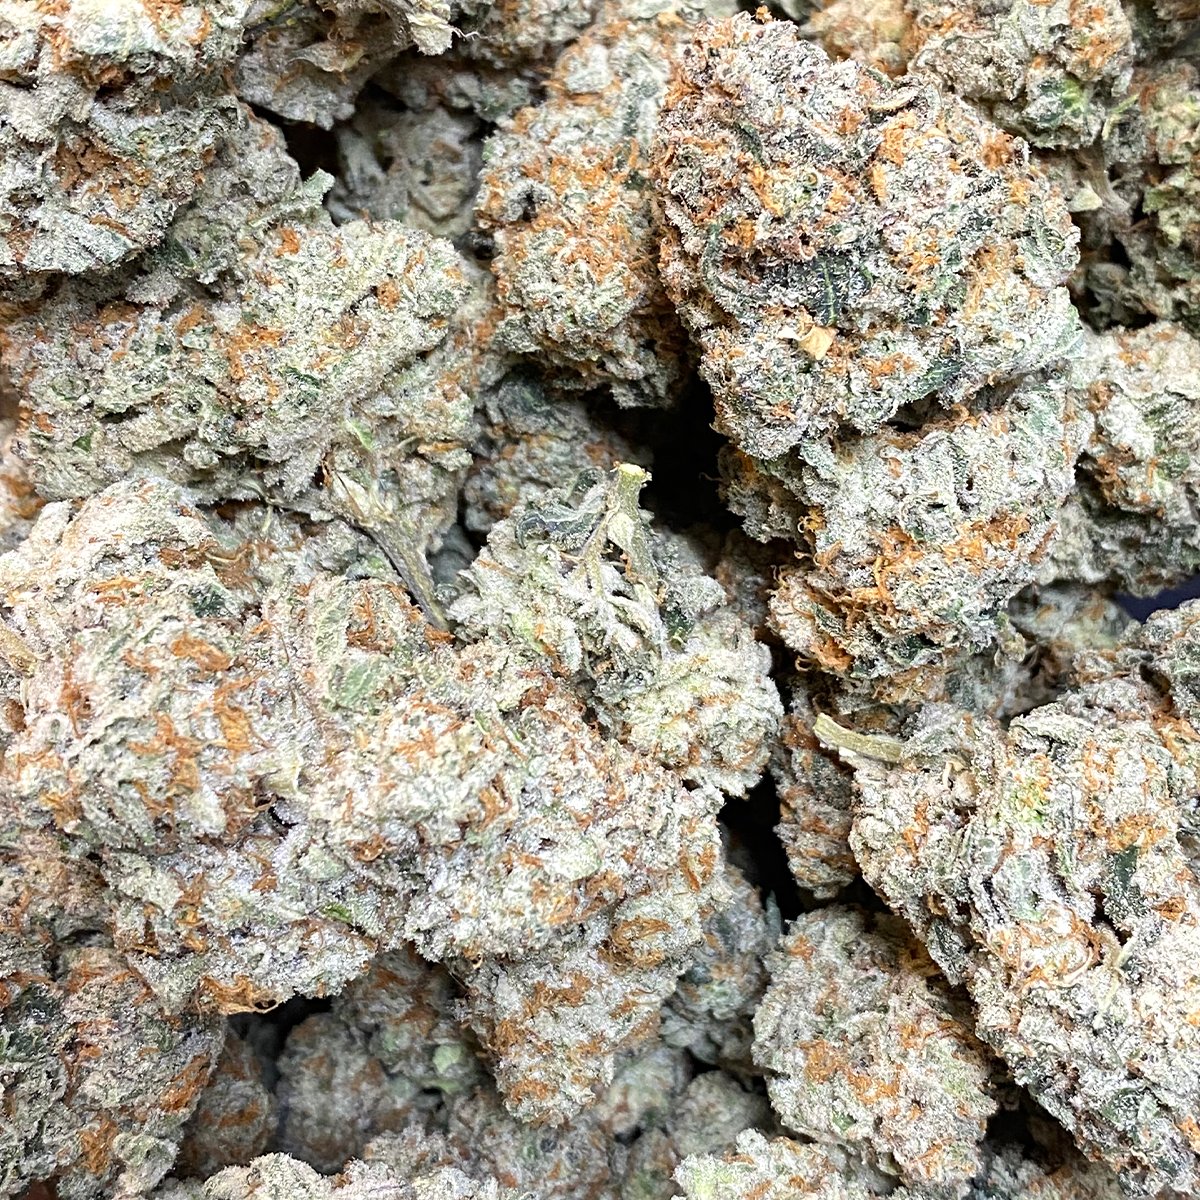 Sour Puss | Buy Weed Online| Dispensary Near Me